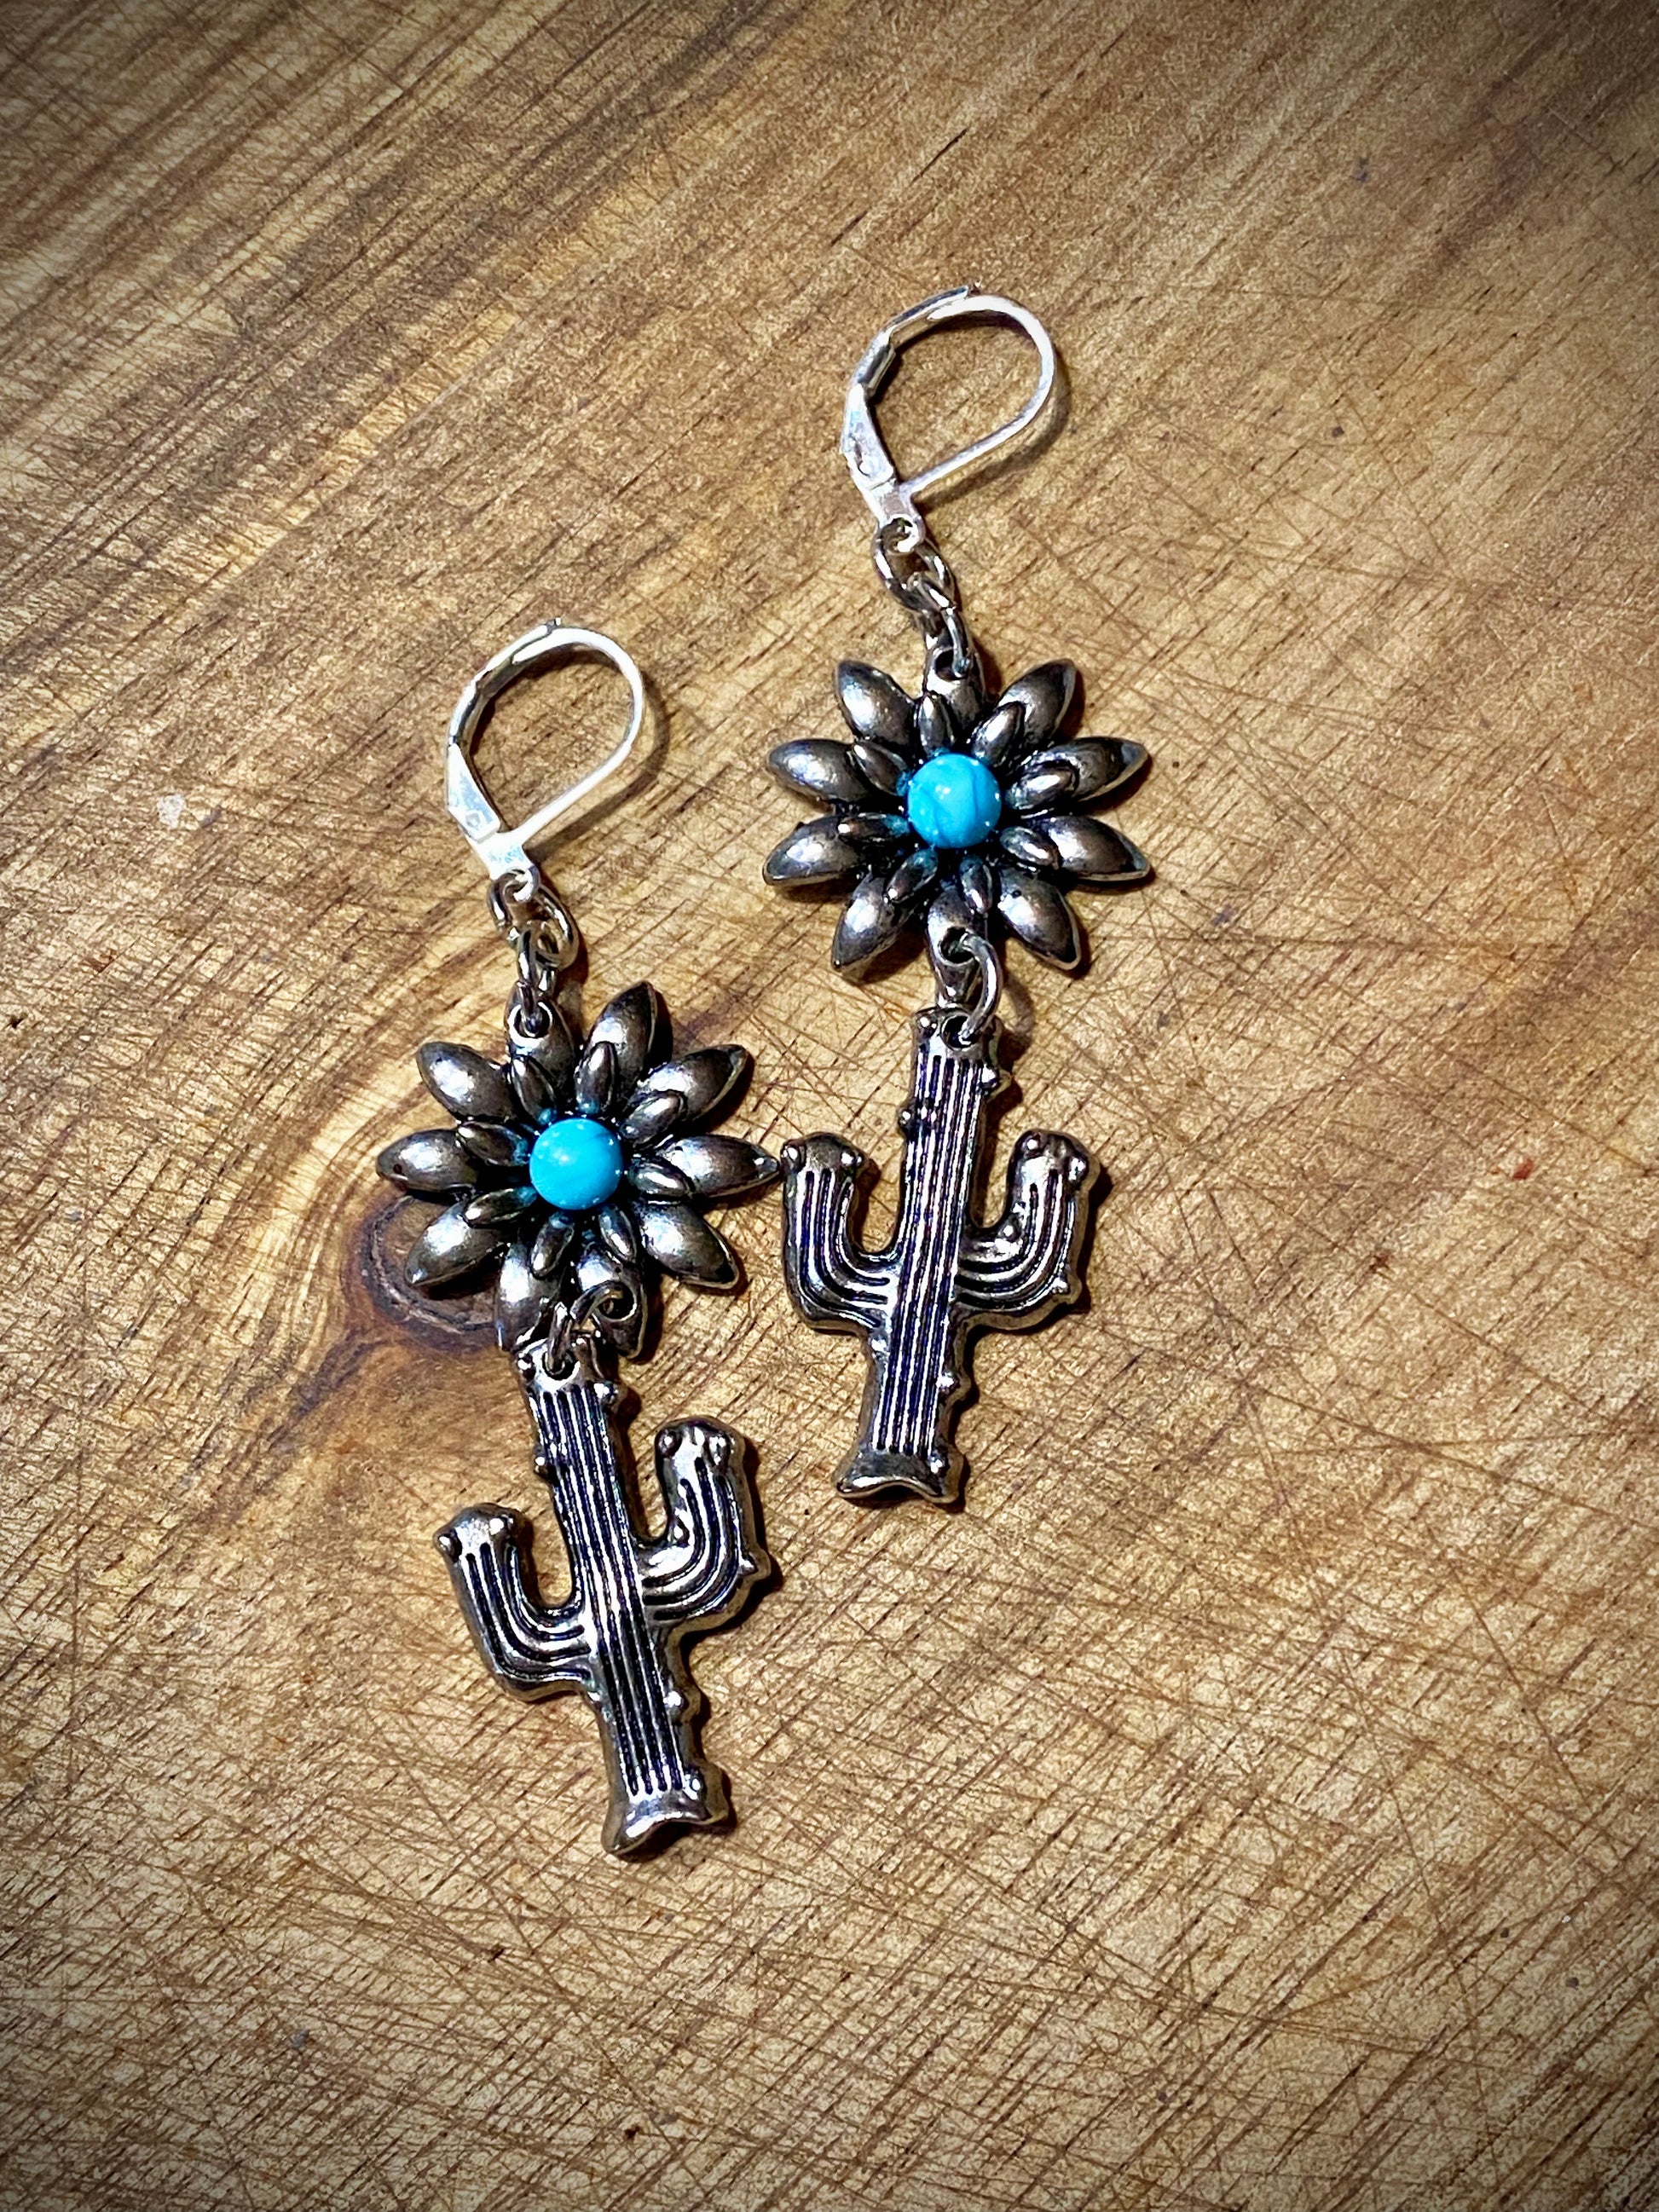 TEAL SUNFLOWER AND CACTUS - CountryFide Custom Accessories and Outdoors